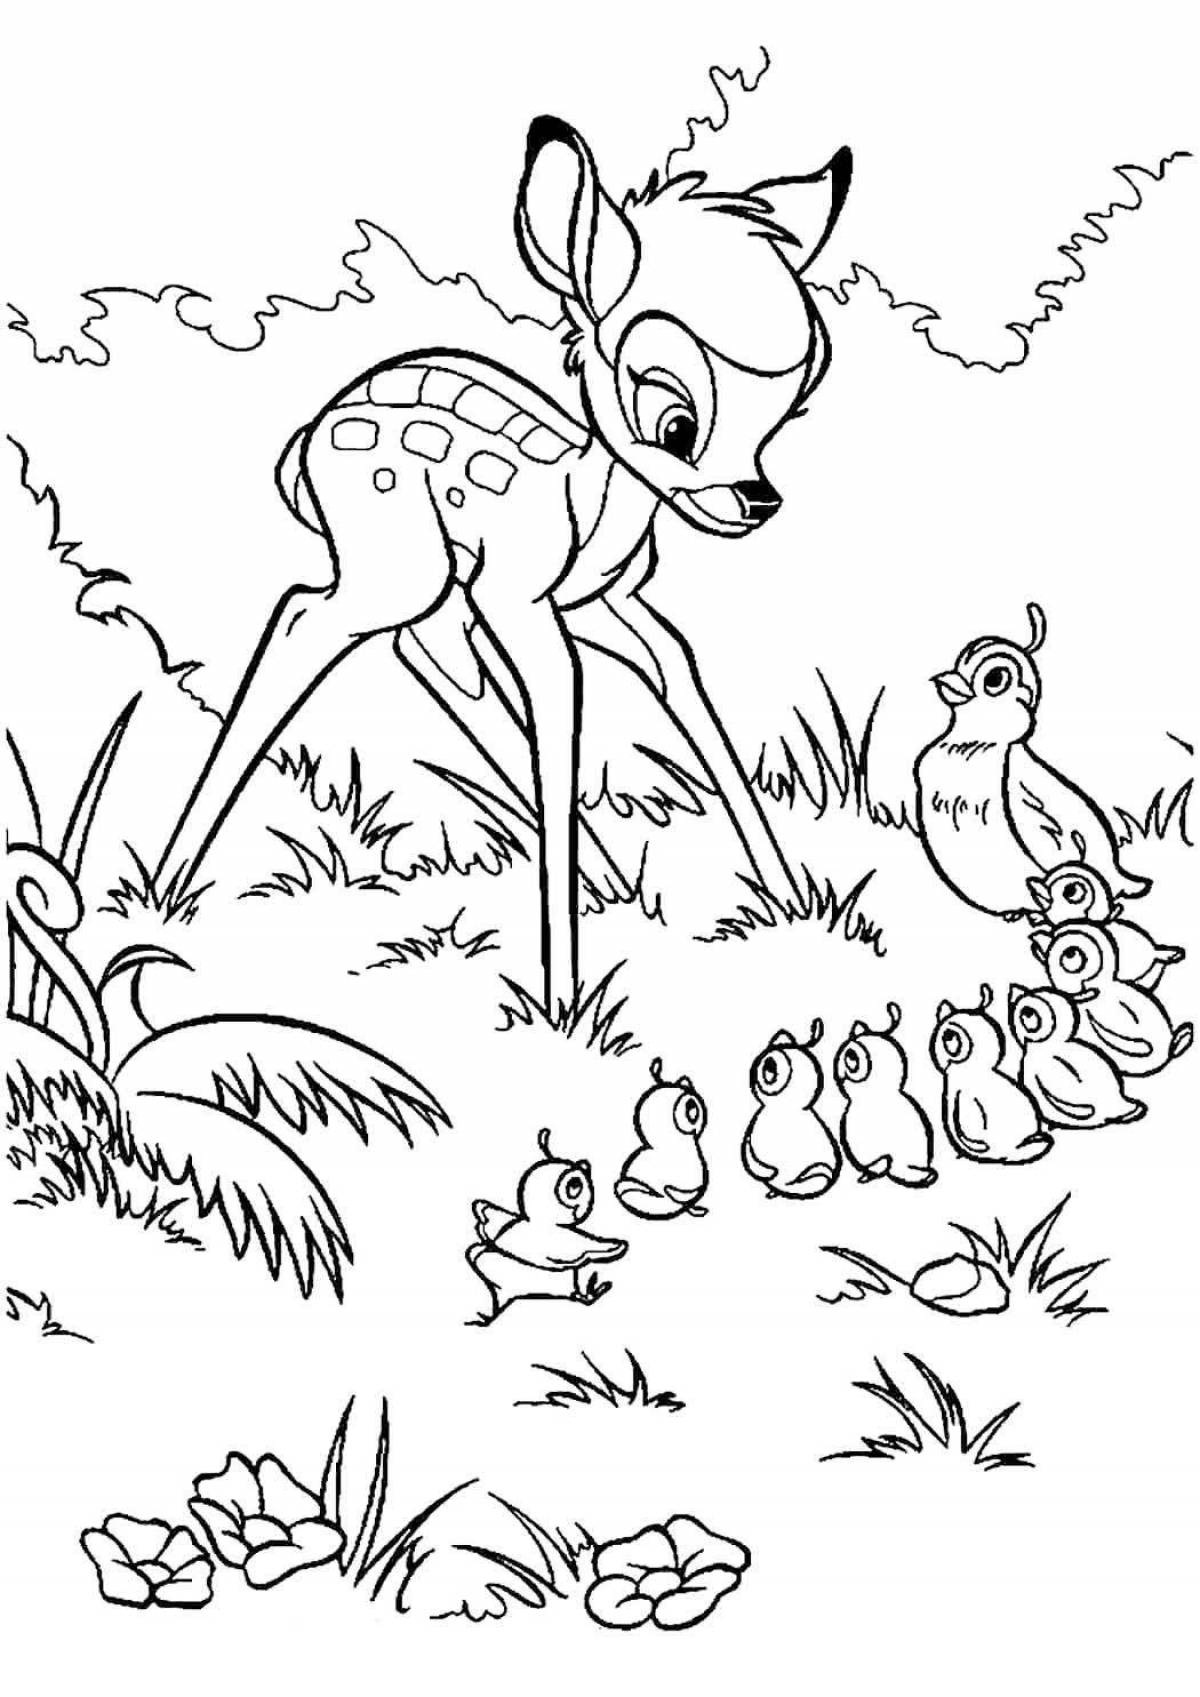 Outstanding bambi coloring book for kids